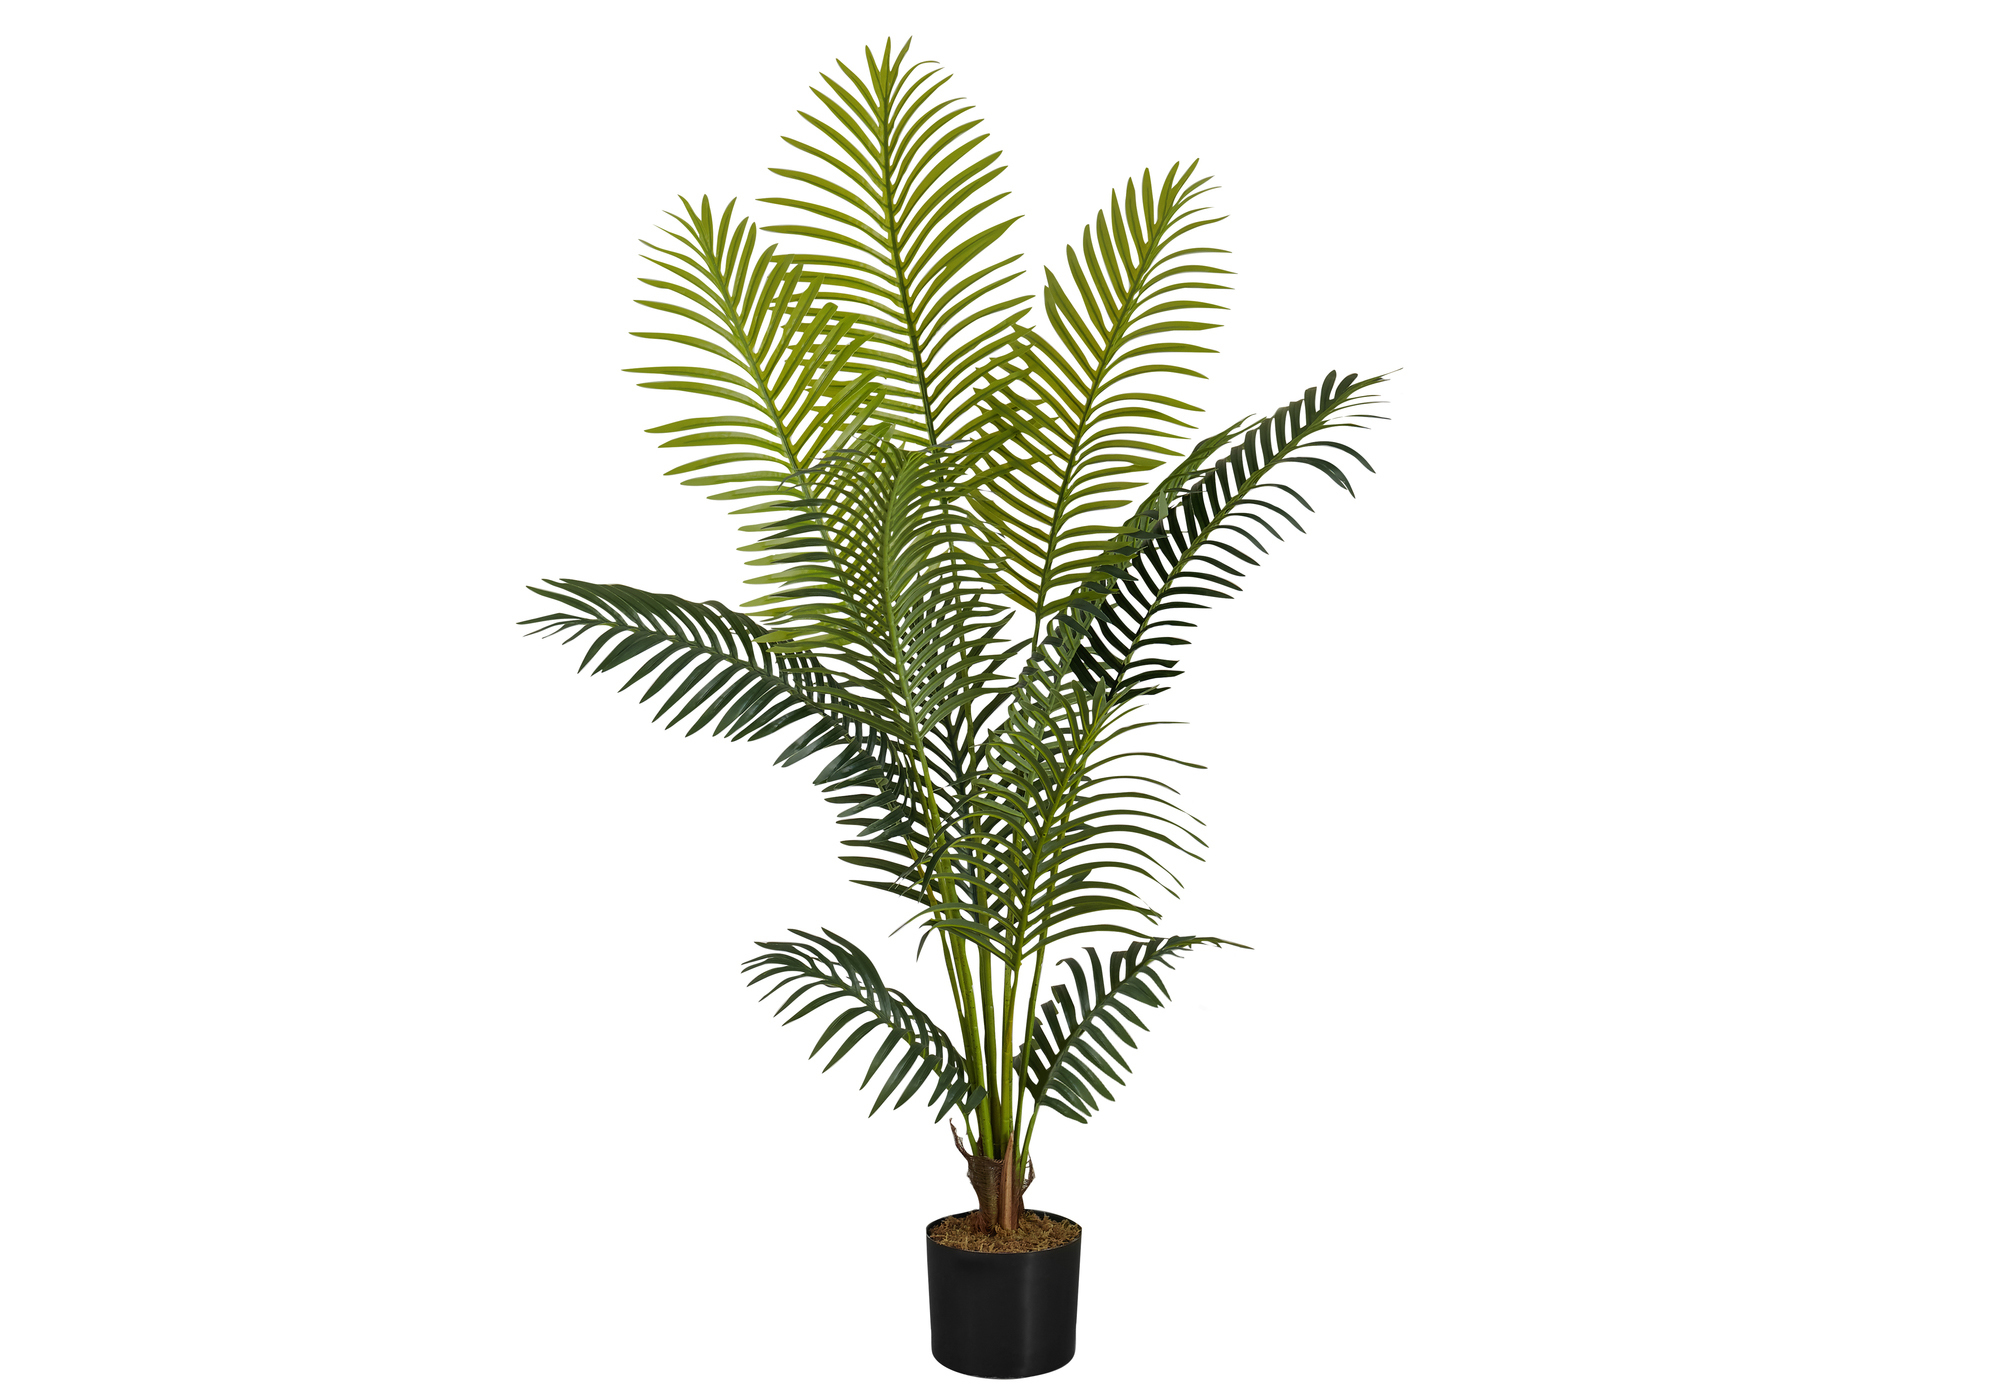 ARTIFICIAL PLANT - 57"H / INDOOR PALM TREE IN A 5" POT